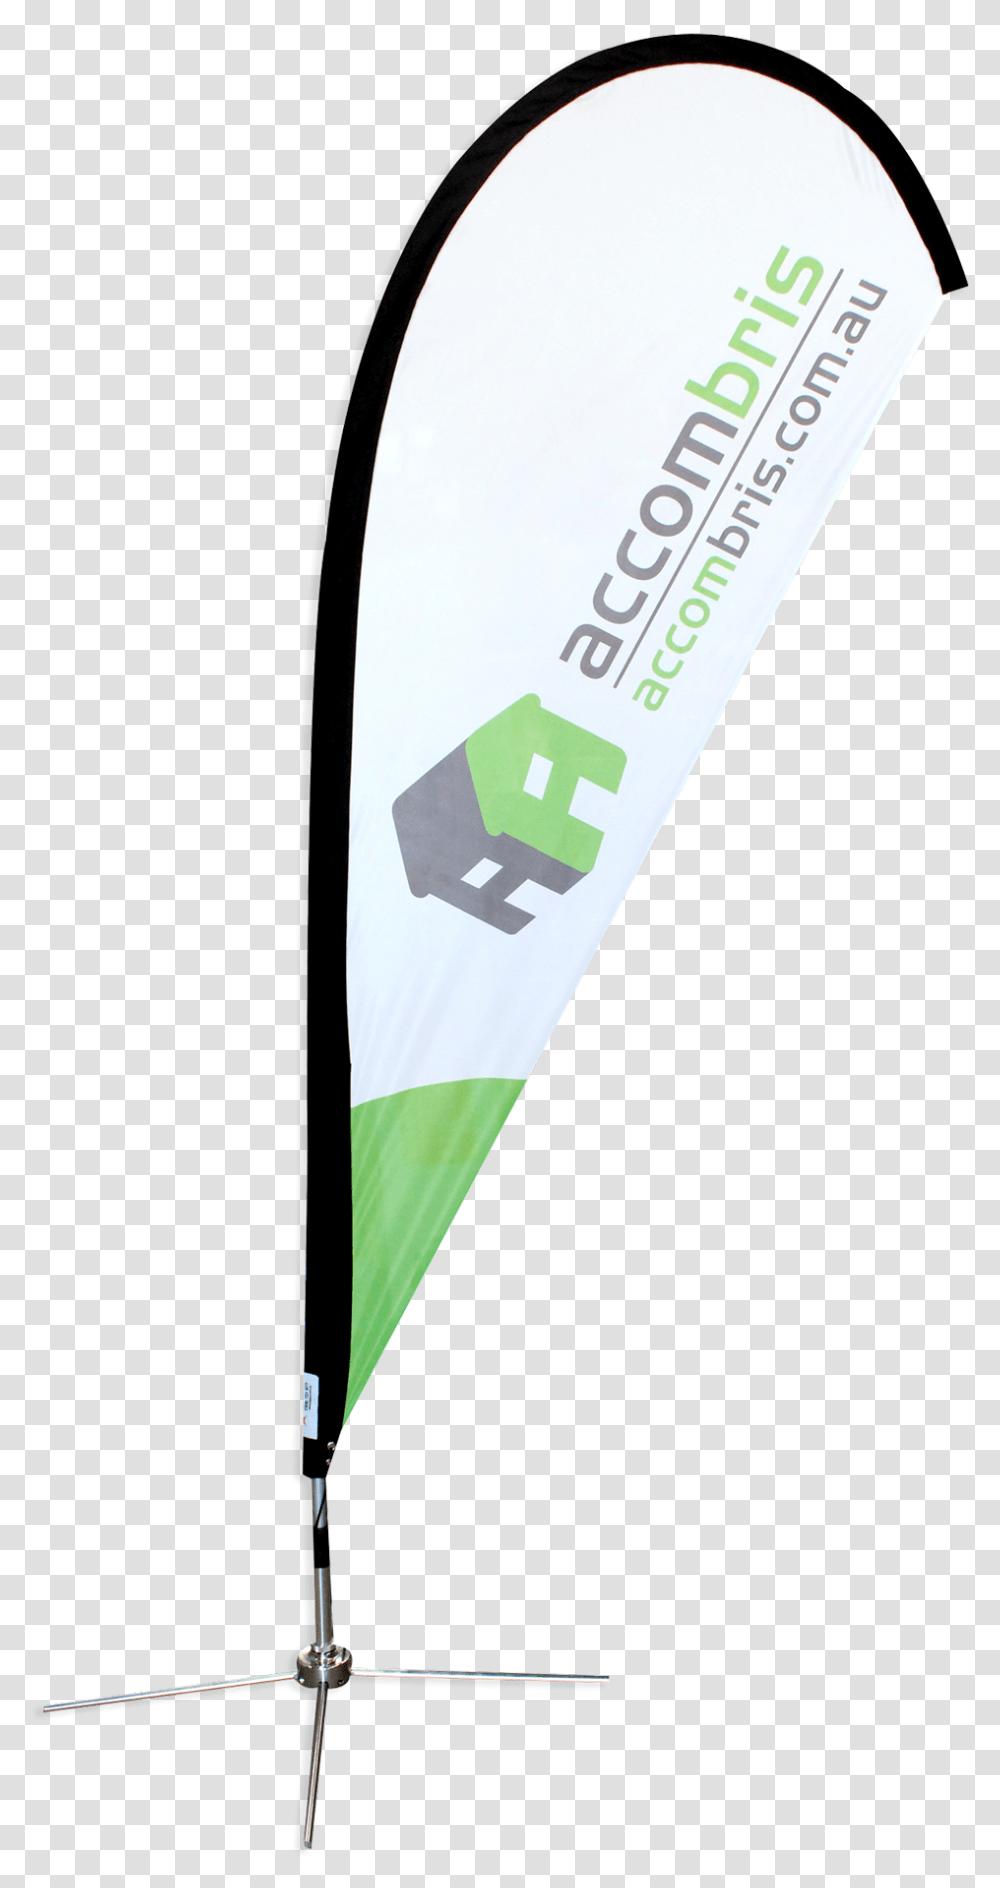 Small Teardrop Banner Teardrop Flag Mock Up Free, Kite, Toy, Sea Waves Transparent Png